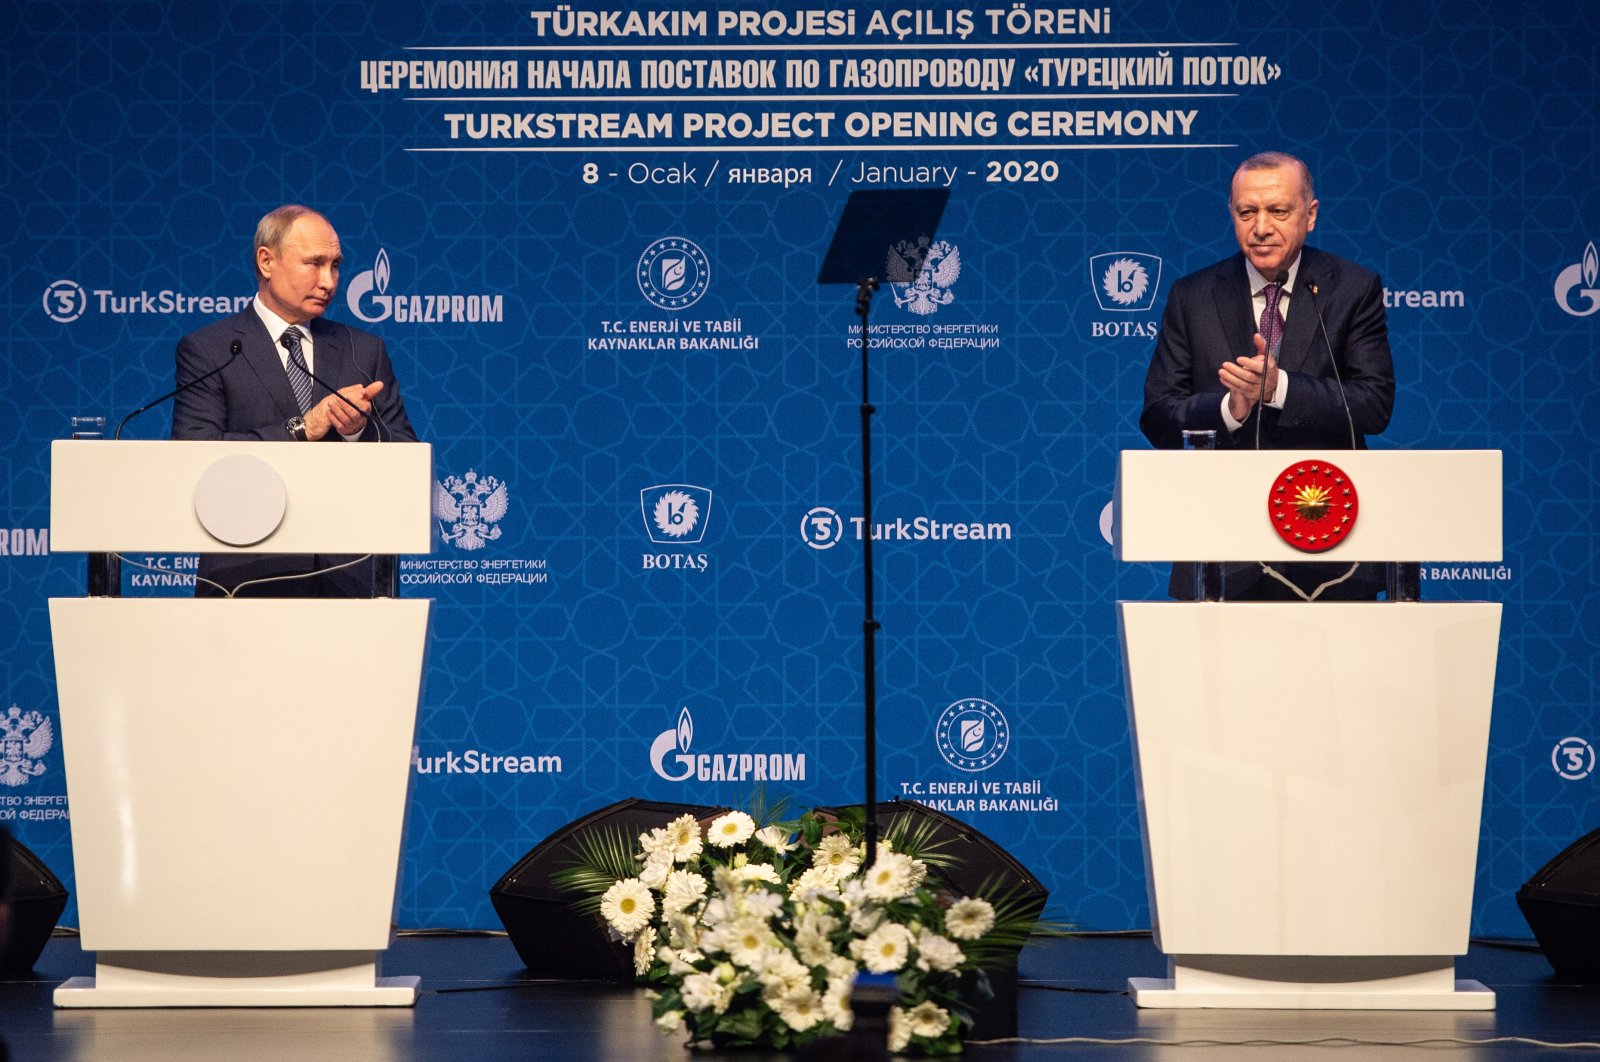 President Recep Tayyip Erdogan and Russian President Vladimir Putin (L) at the opening ceremony of the Turkstream gas pipeline project, Istanbul, Turkey, Jan. 8, 2020. (Photo by Getty Images)